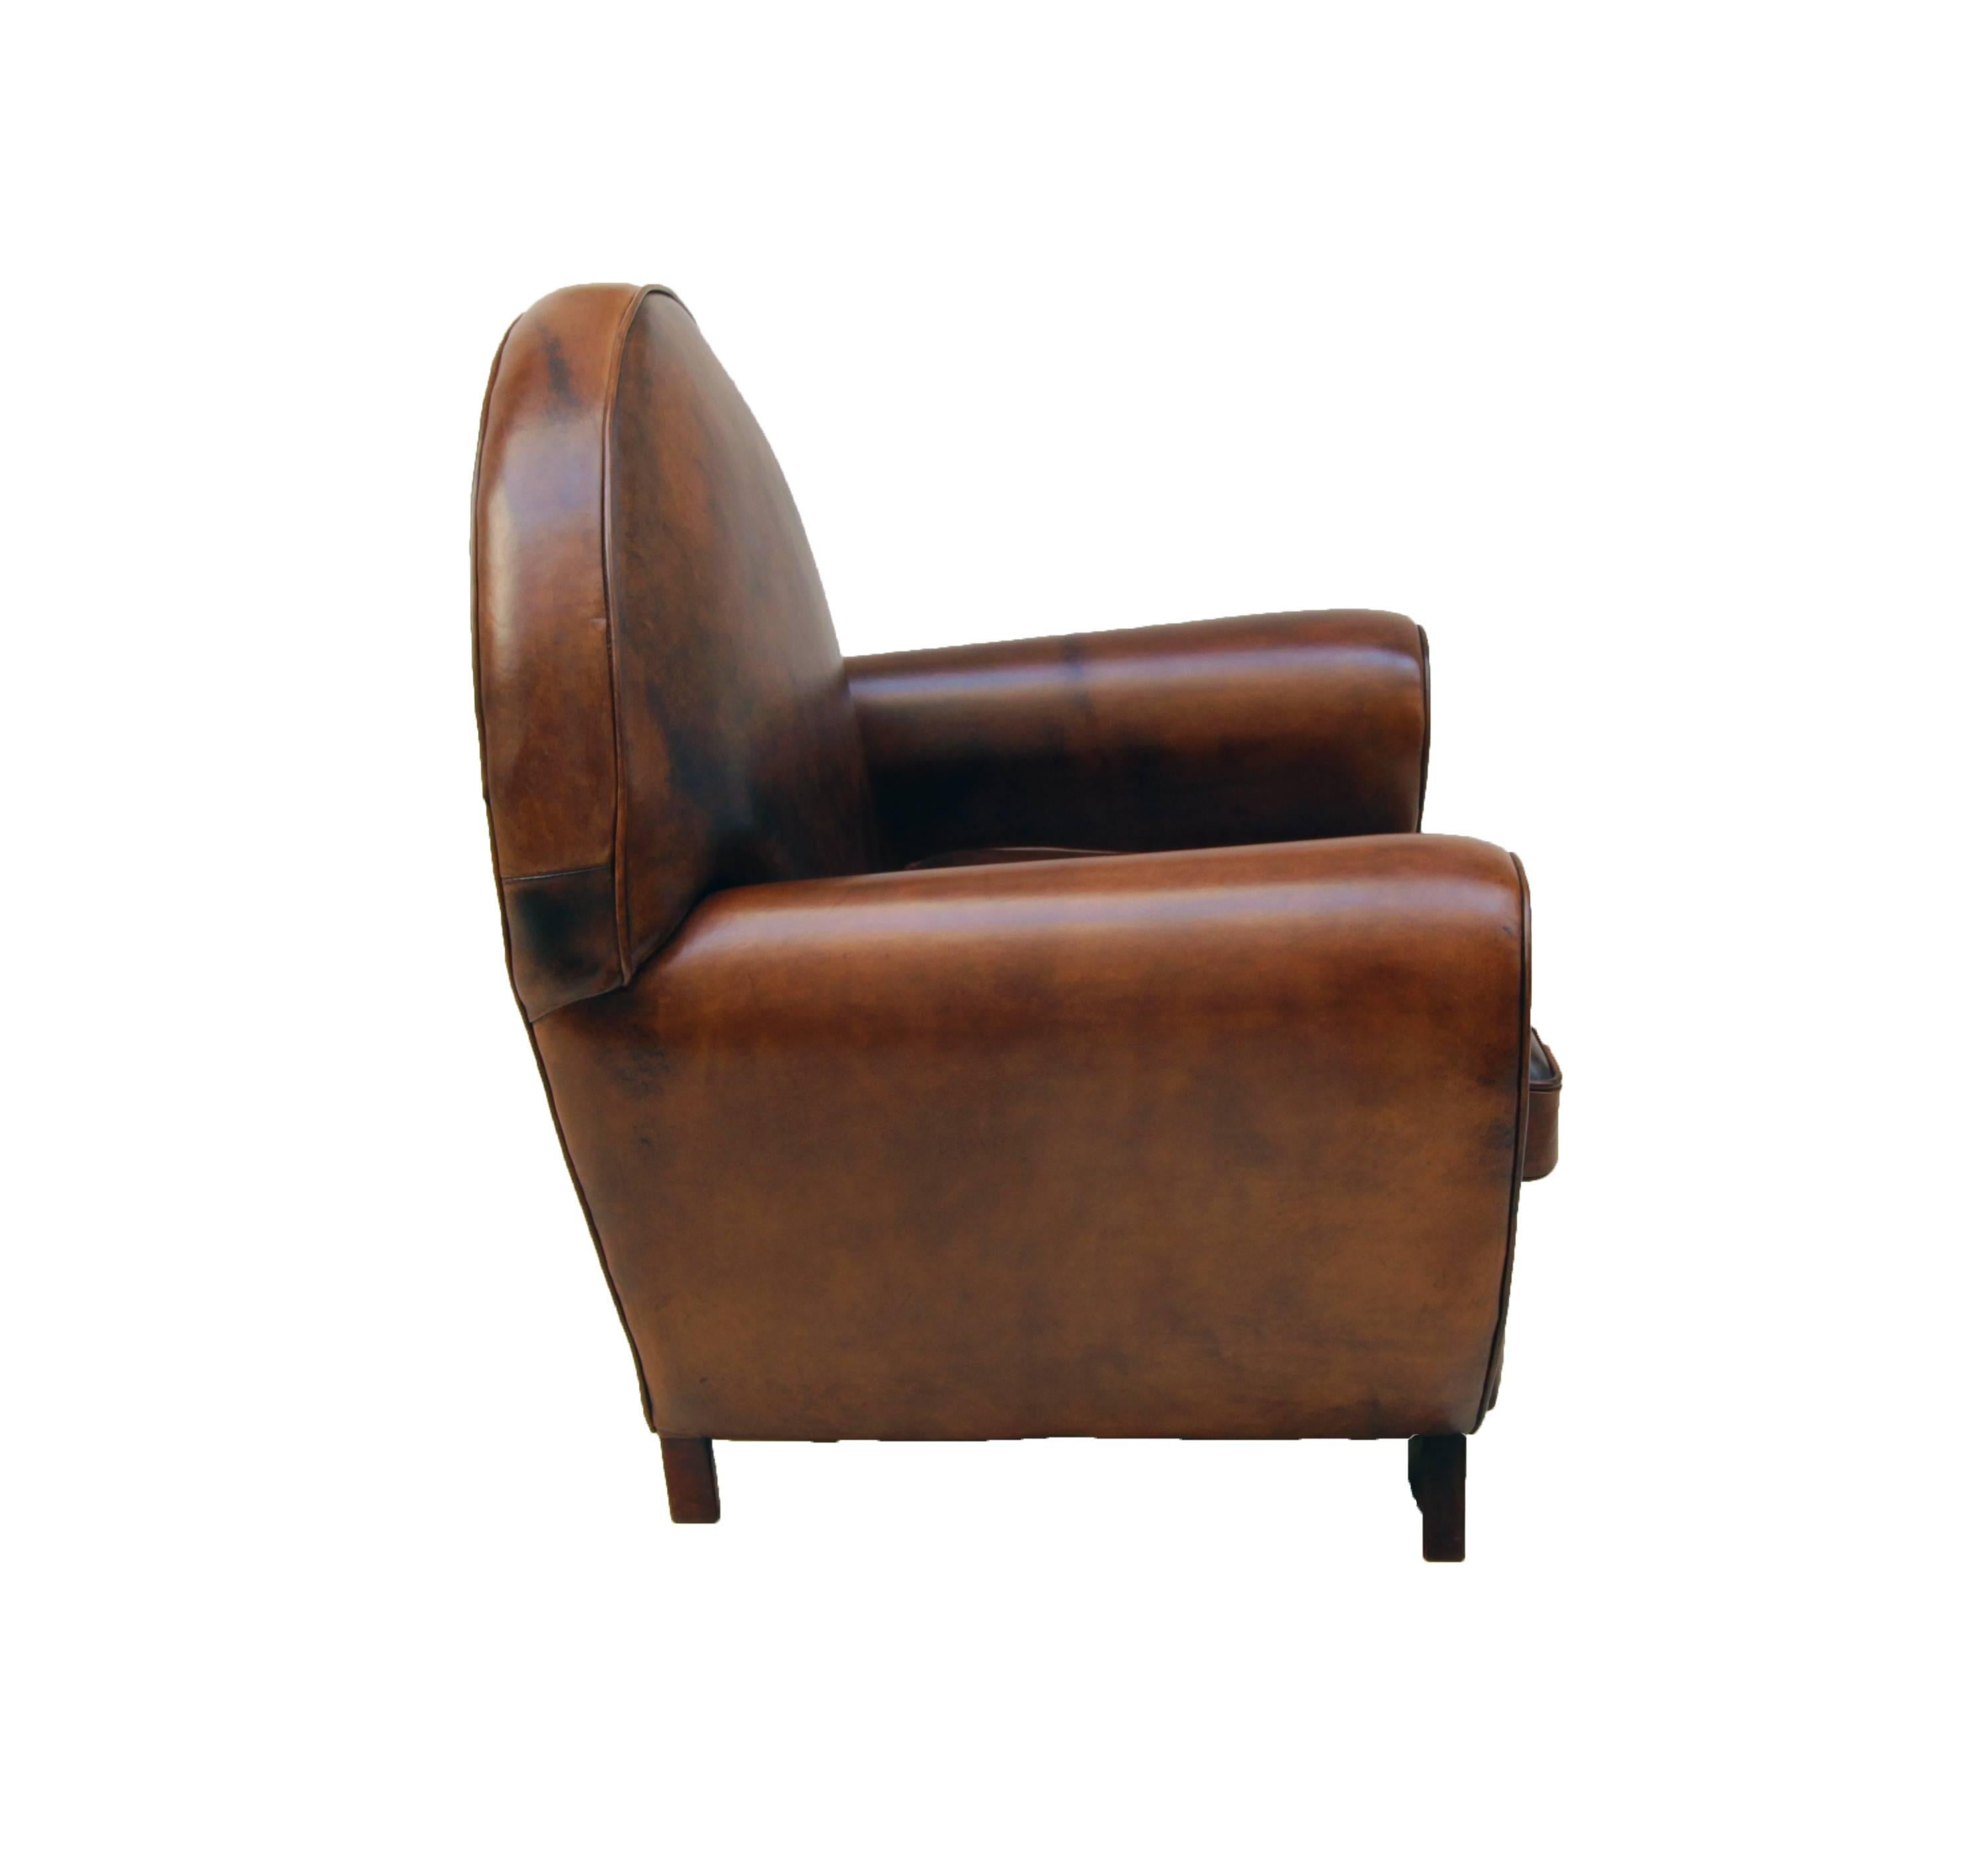 This club armchair, is covered with hand-patinated sheep leather. The armchairs have a very nice Art Deco shape. The leather is very sturdy and it is very comfortable to sit.